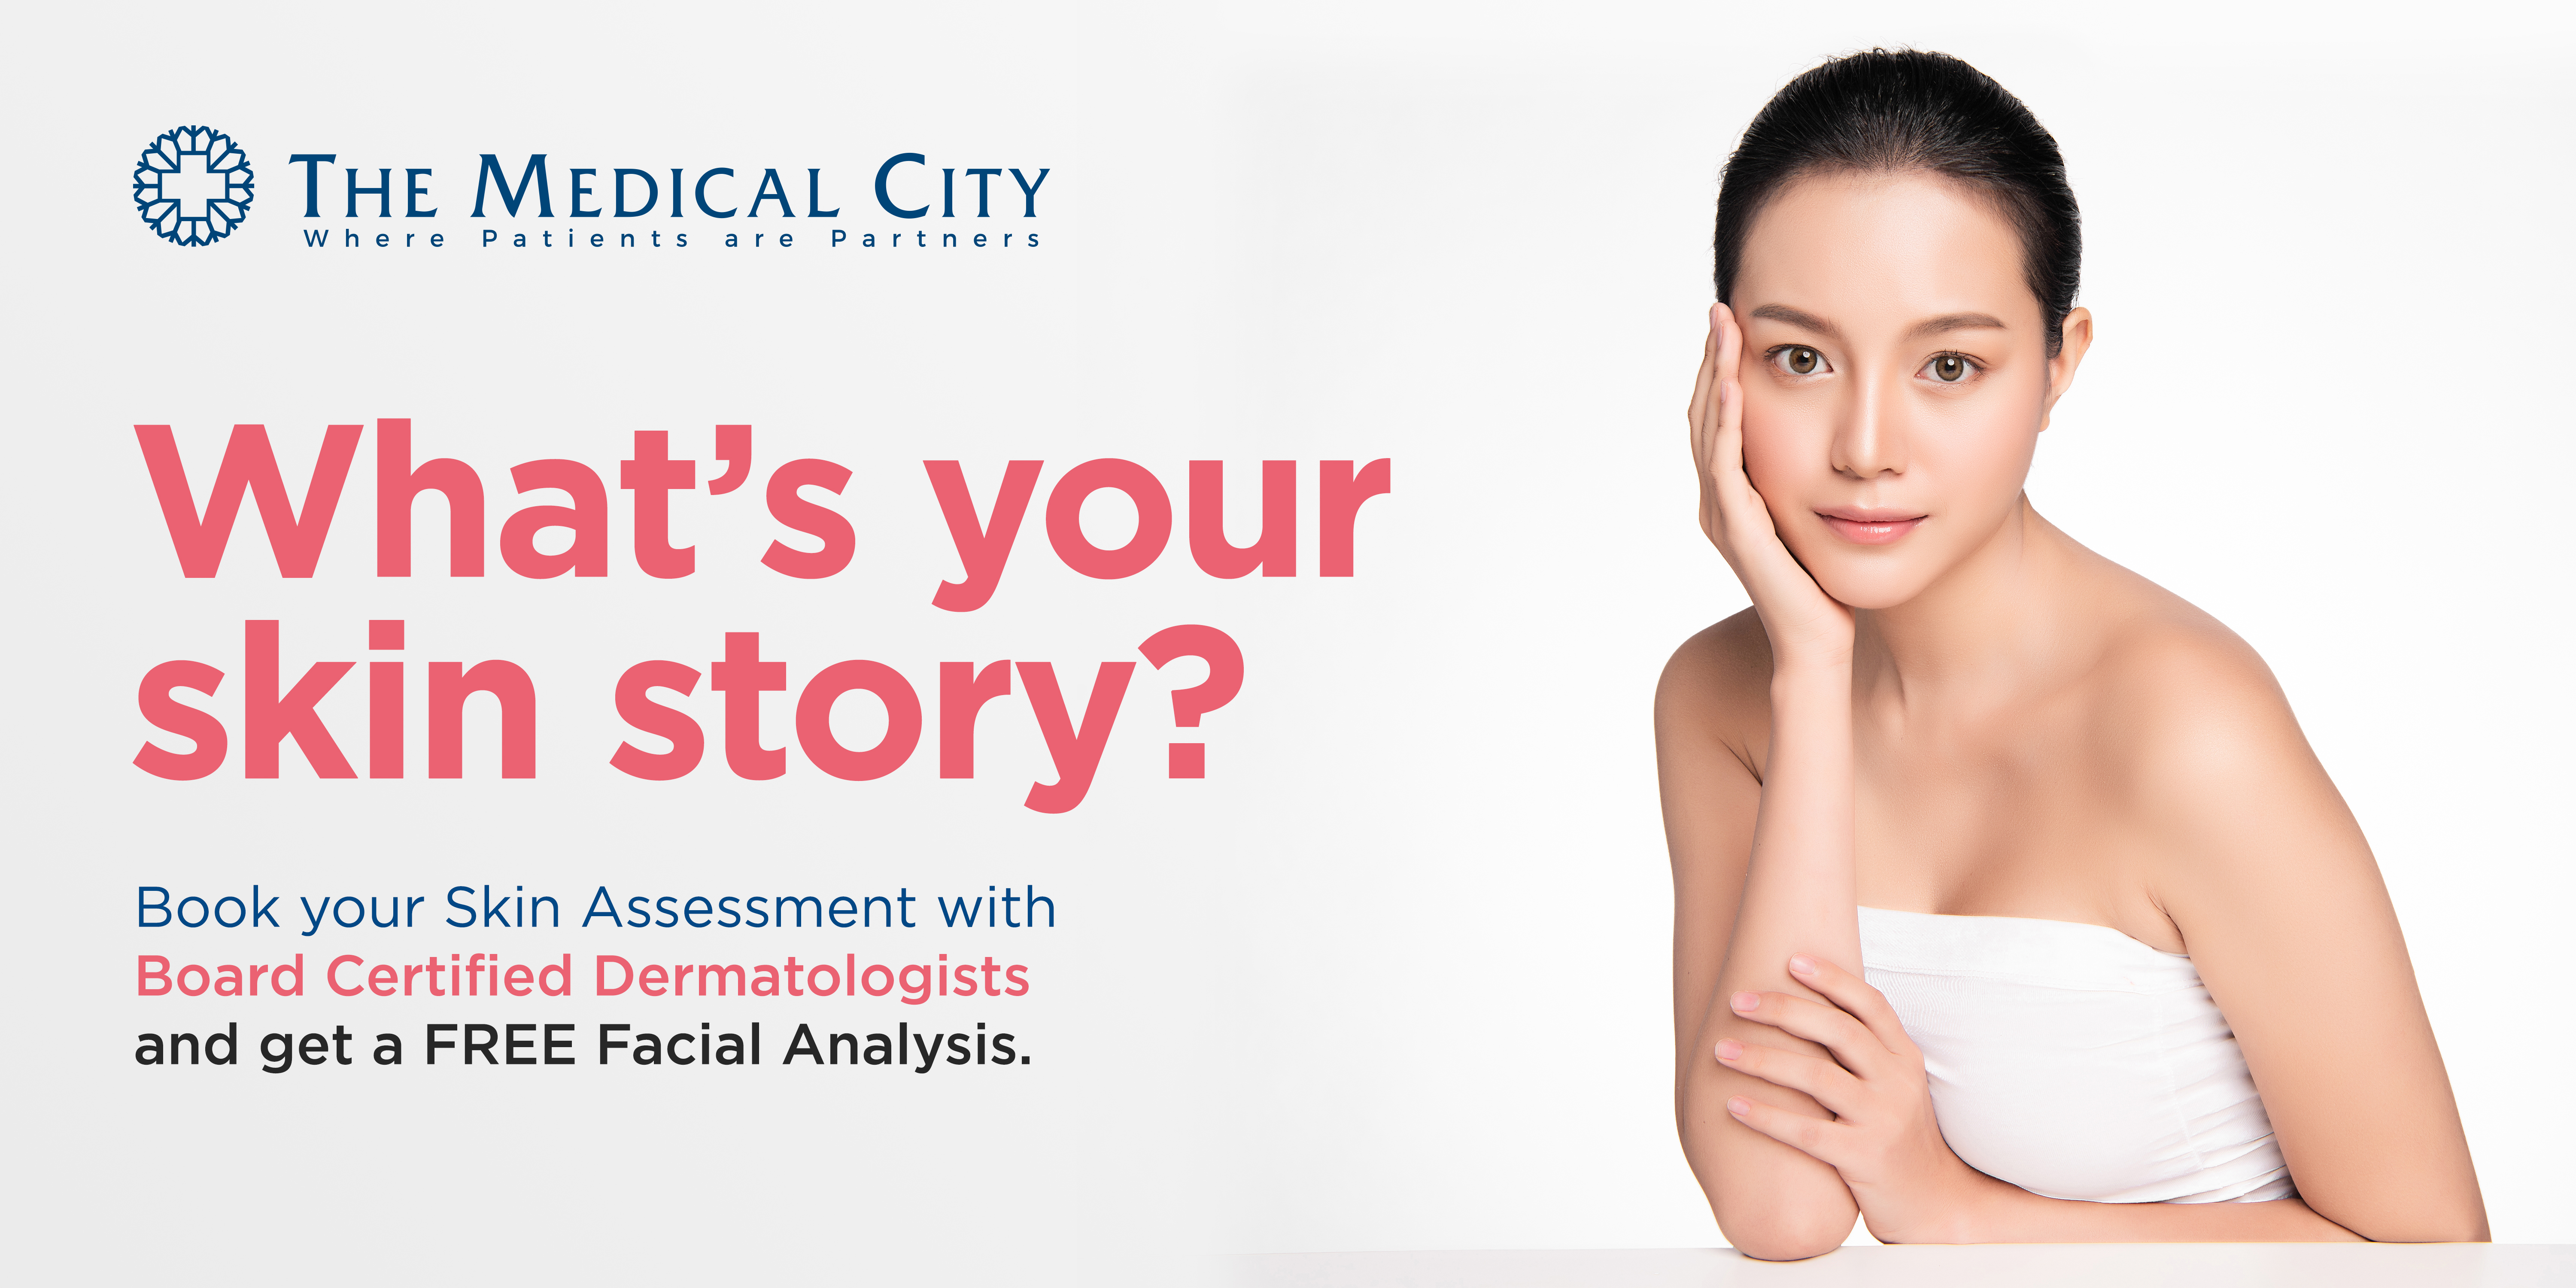 the medical city dermatology department poster